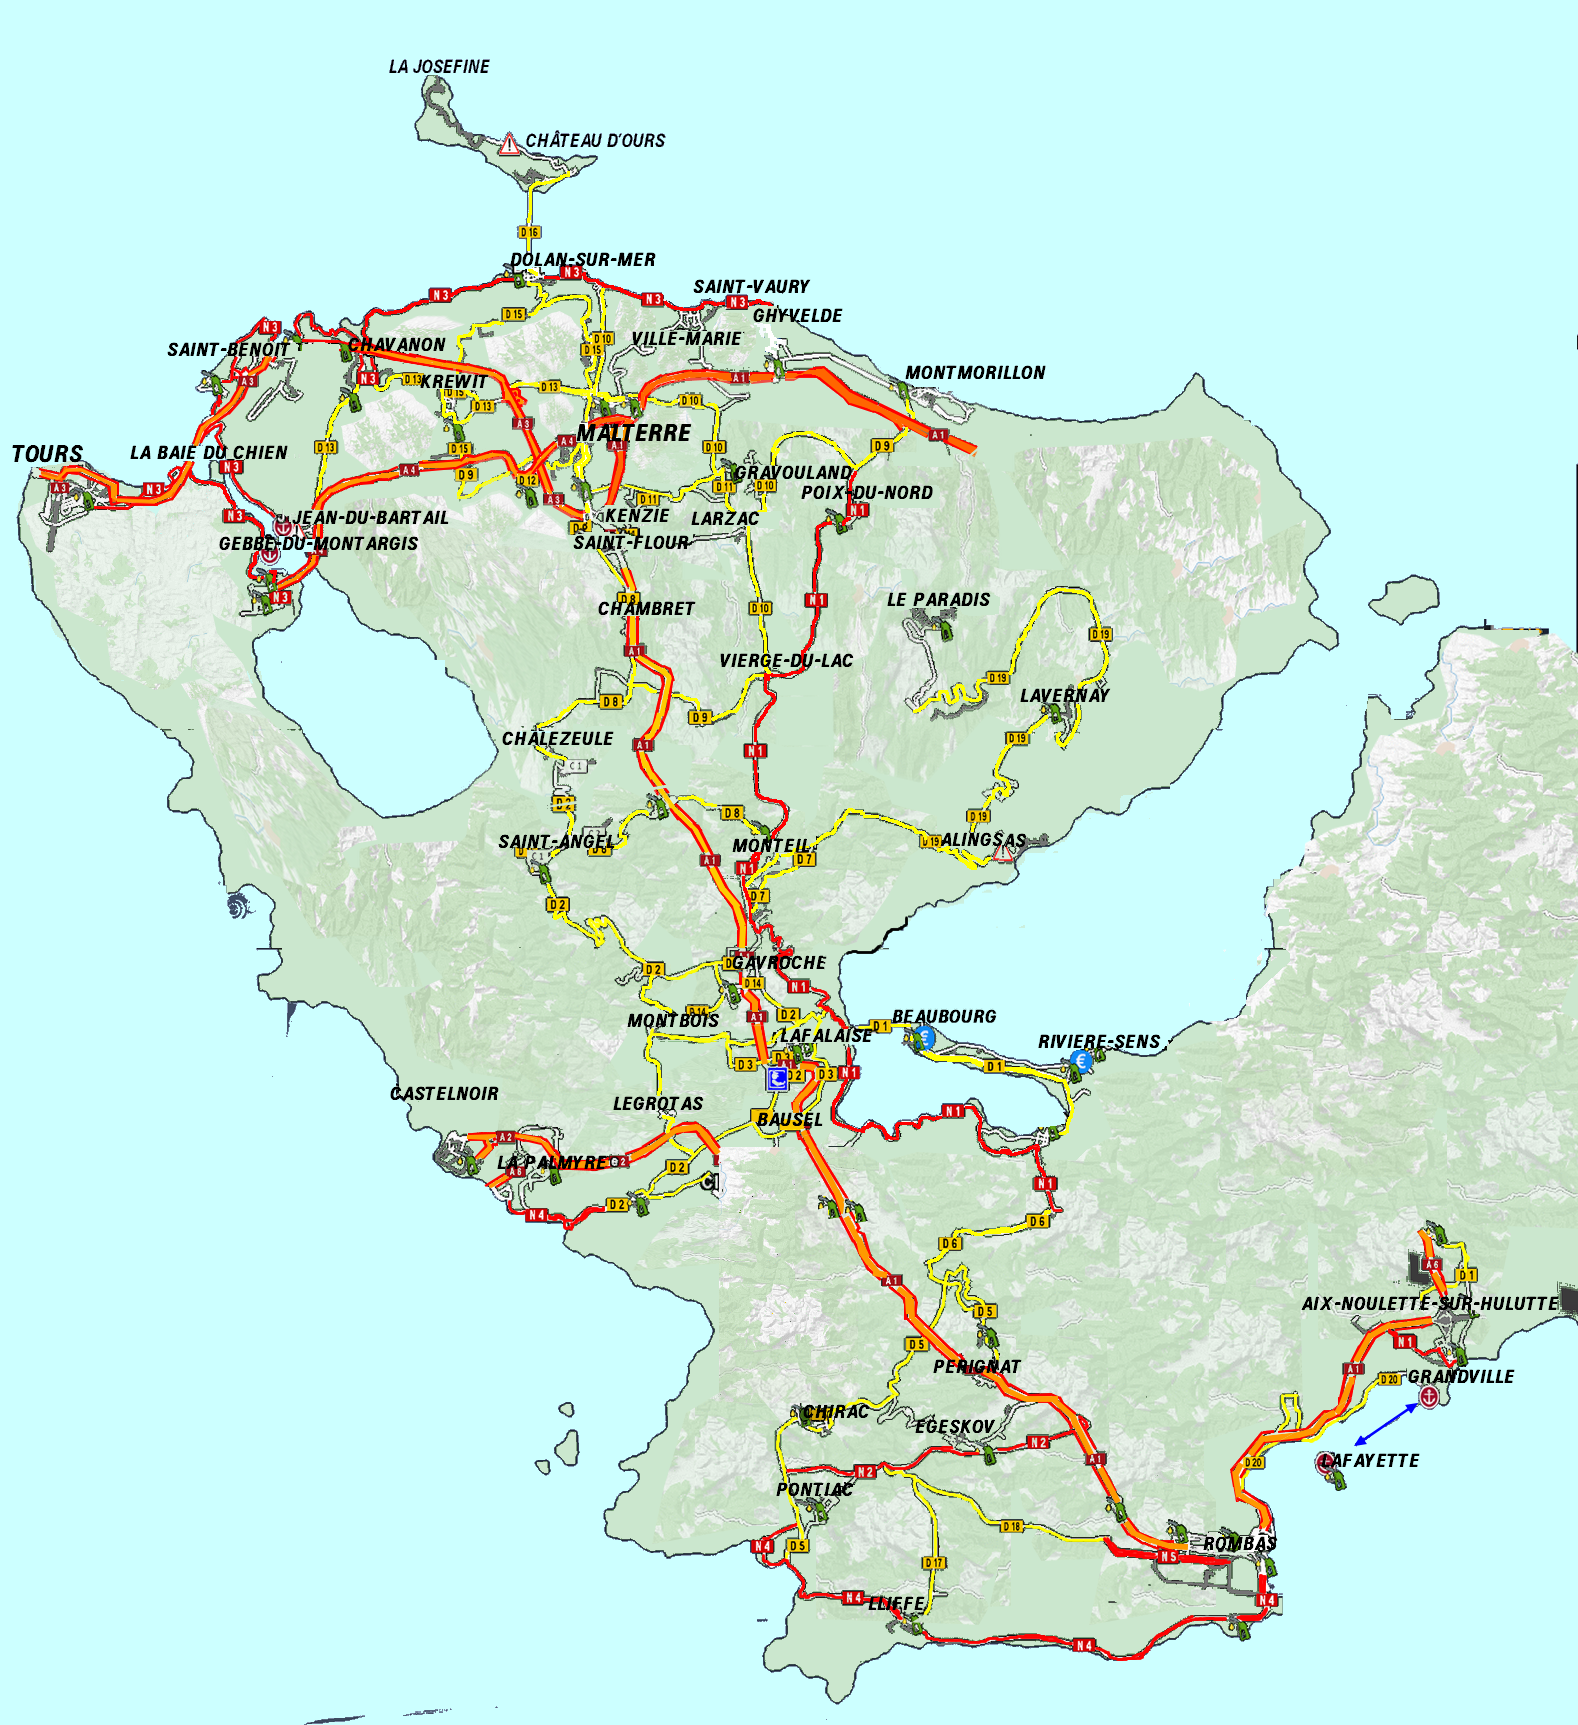 Grand utopia road map made by jean louis